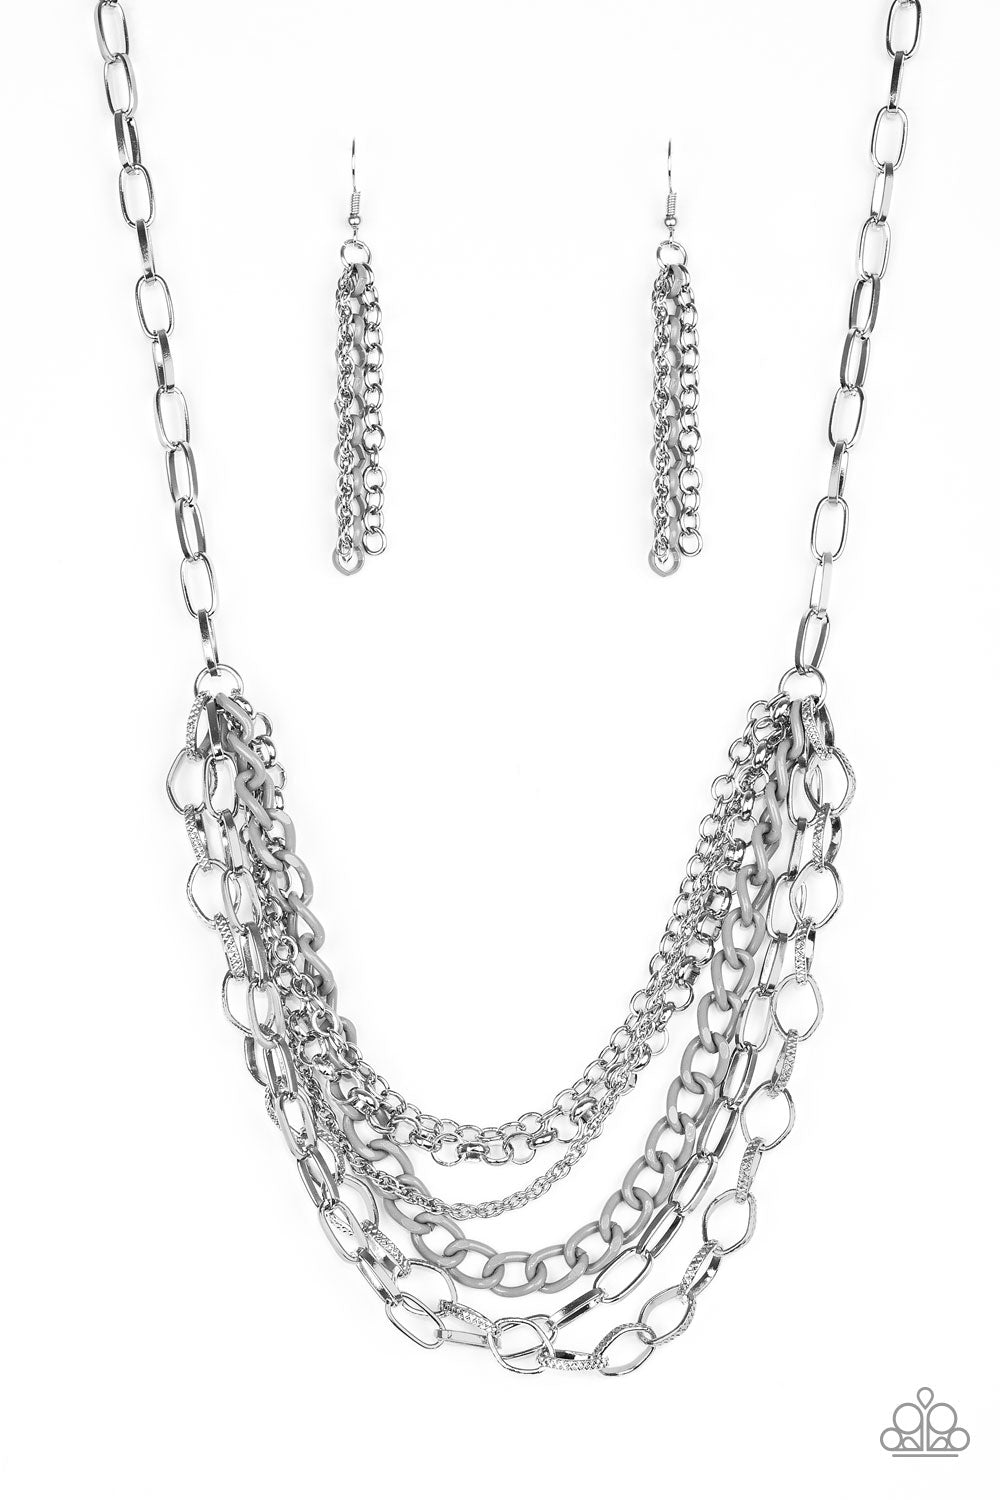 Mismatched silver chains layer below the collar for a bold industrial look. Painted in a neutral finish, a shiny gray chain drapes between the shimmery silver chains for a vivacious finish. Features an adjustable clasp closure.  Sold as one individual necklace by Paparazzi. Includes one pair of matching earrings.